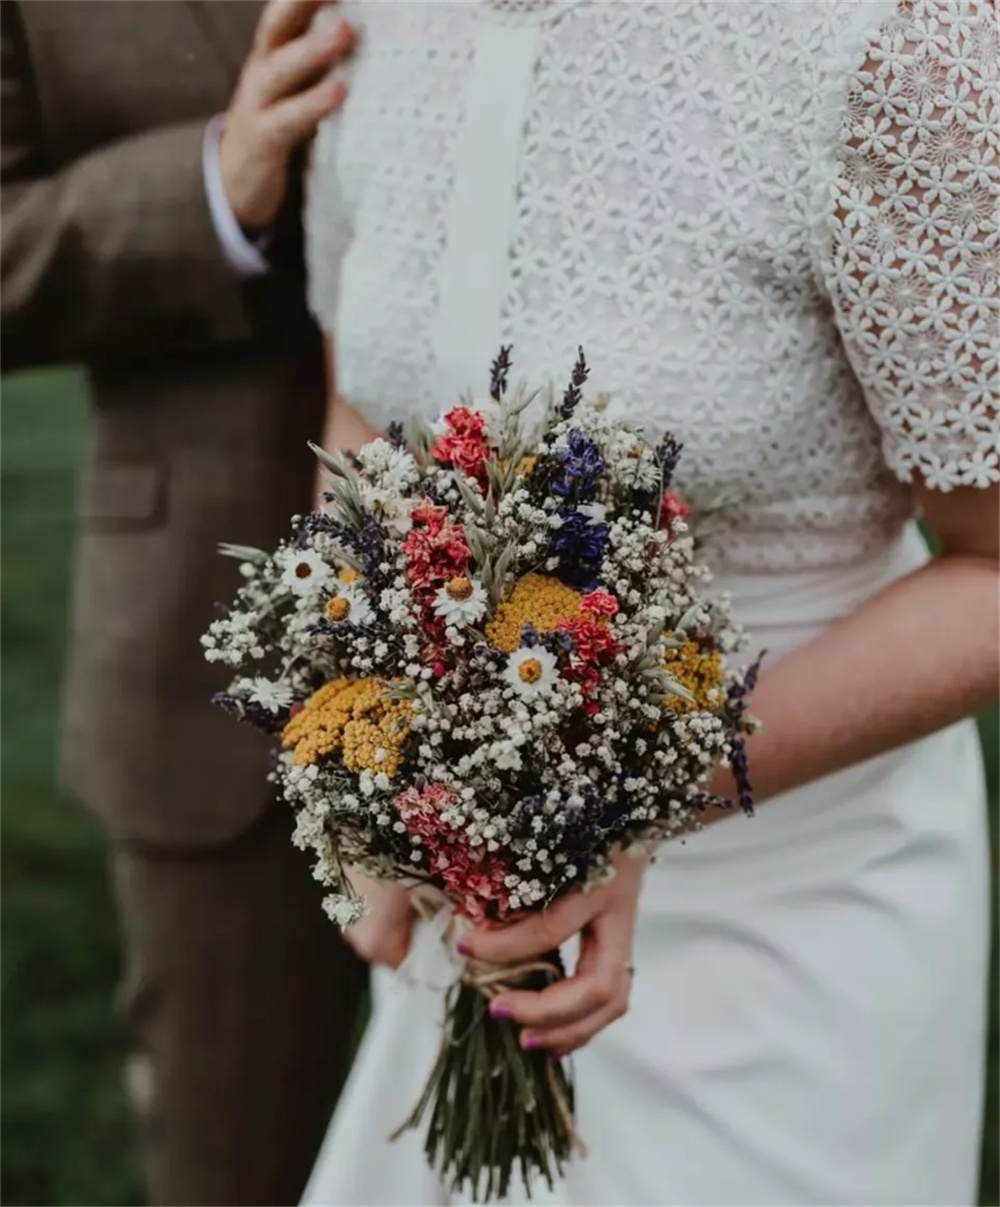 Wedding Bouquets with Dried Flowers for Fall Weddings